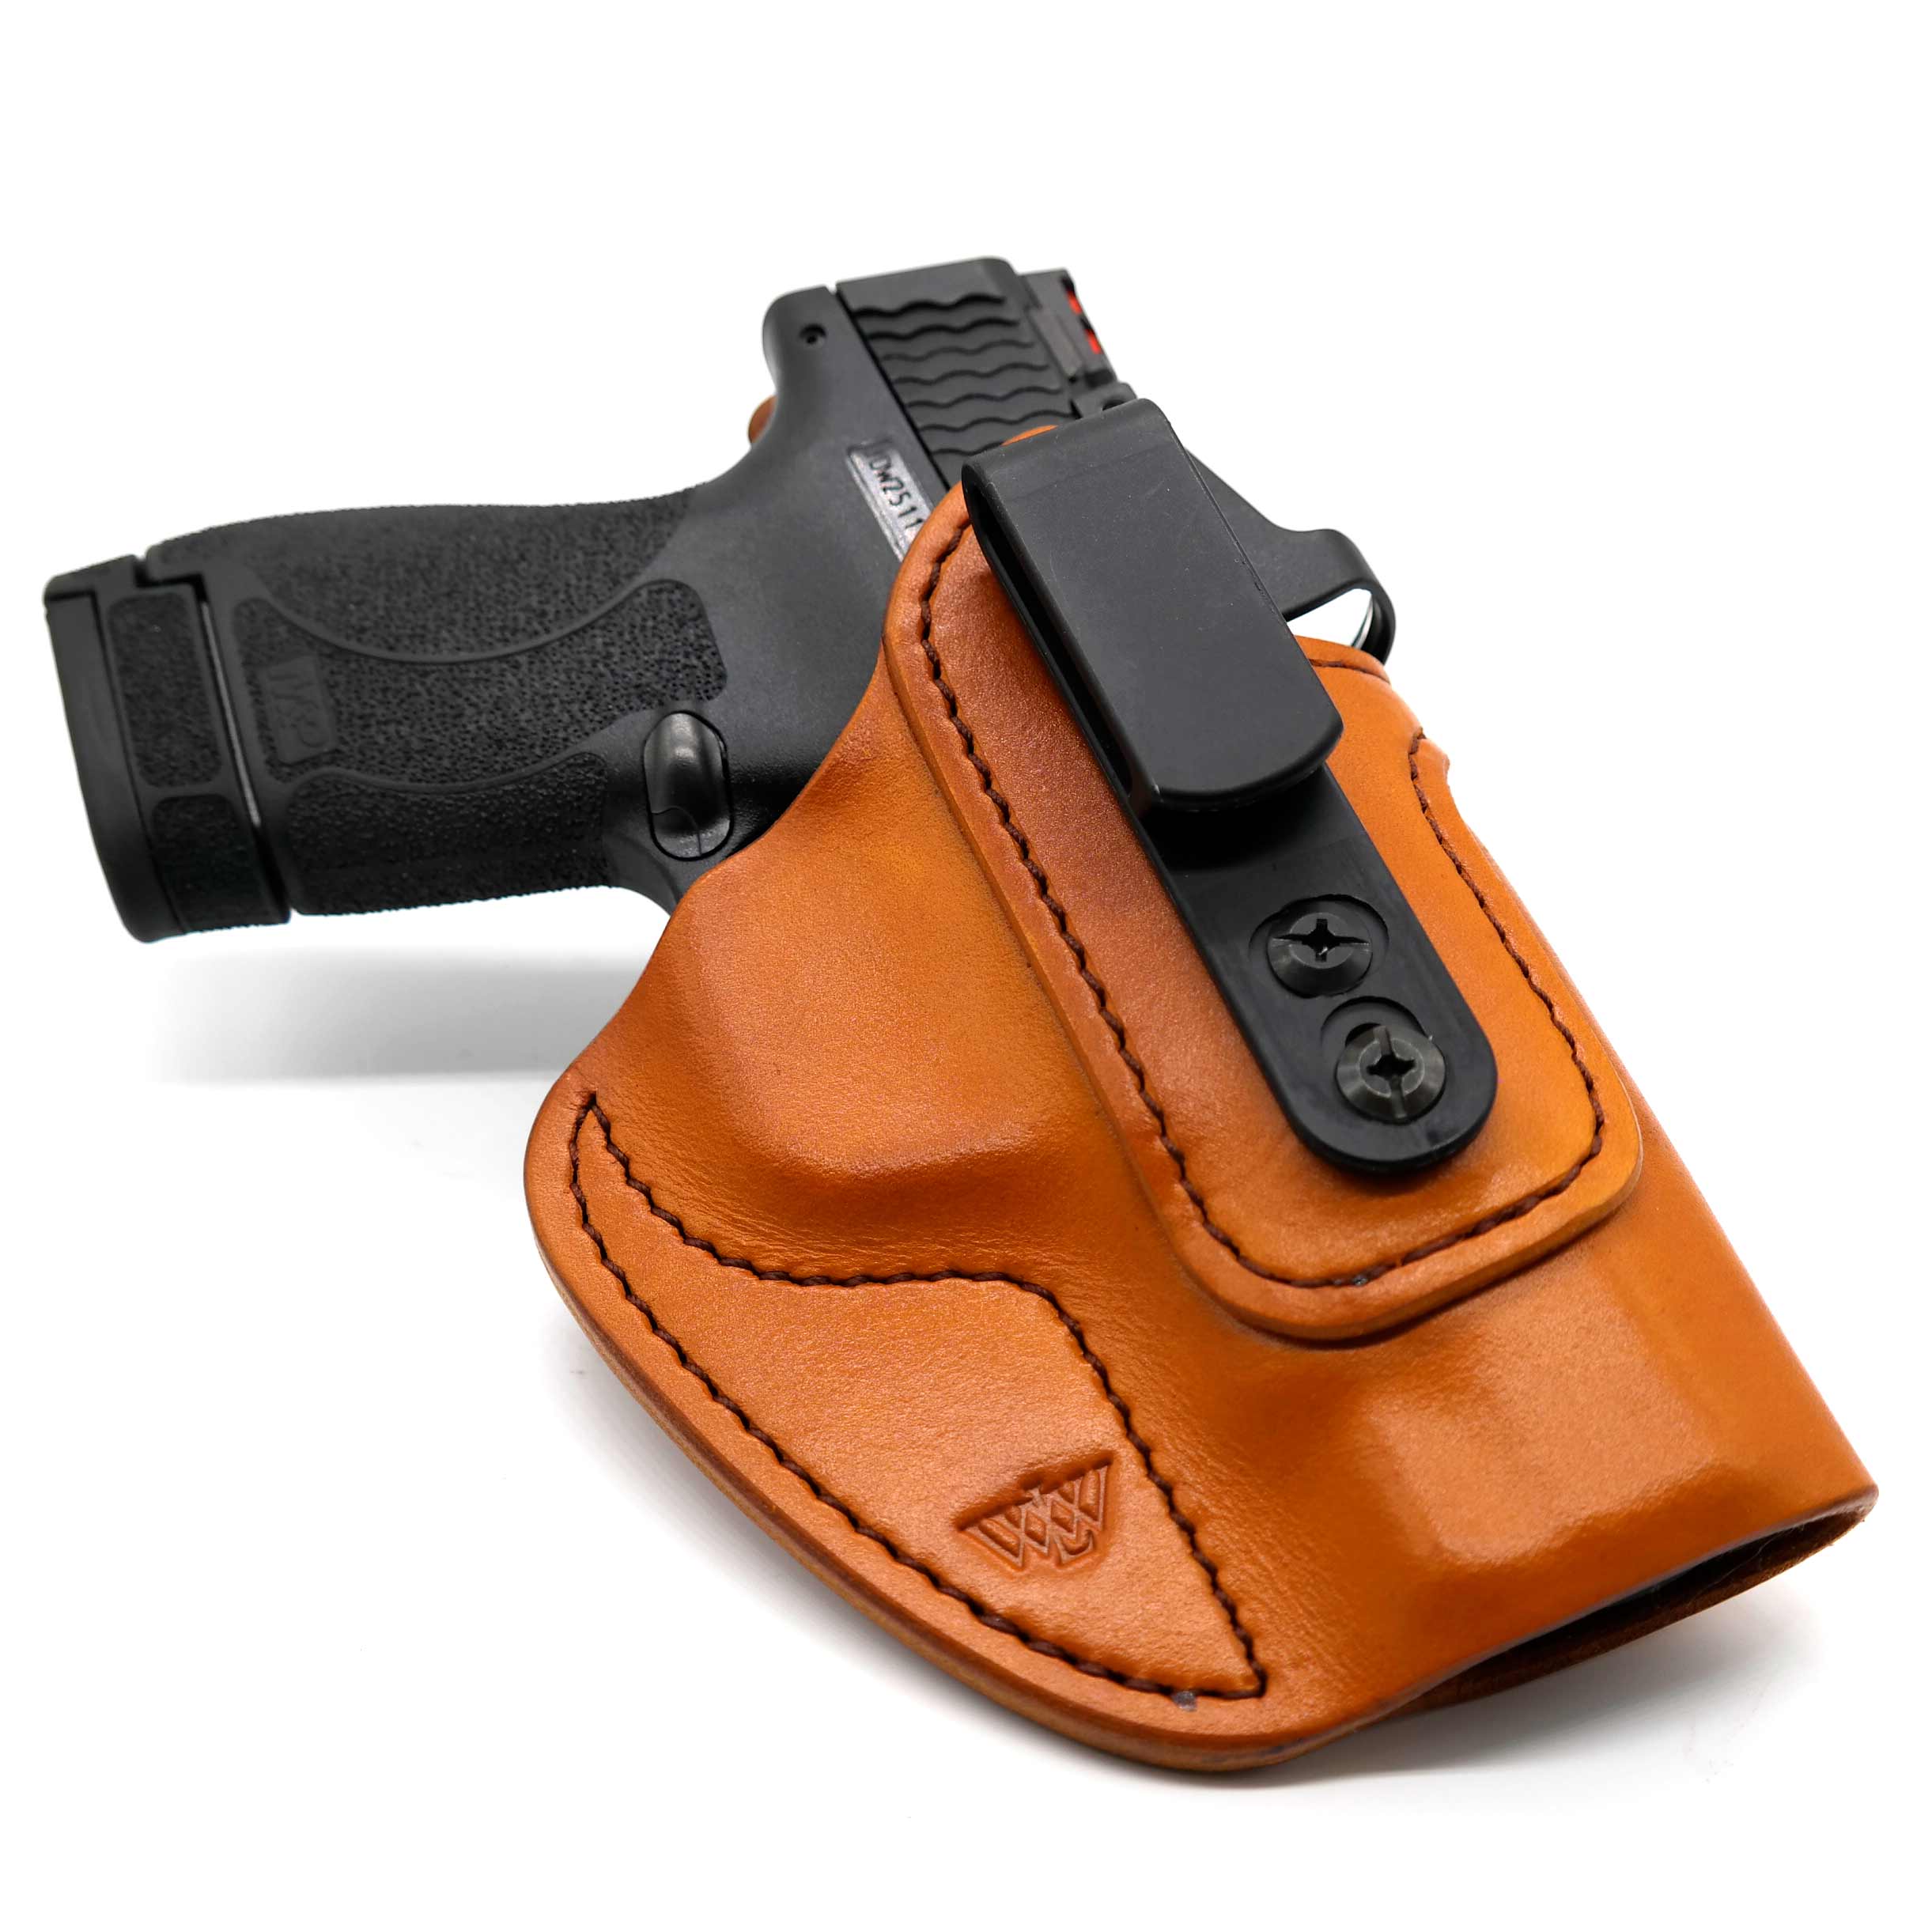 Weaver Leather Supply 01086-BK #1088 Holster Clip with Adjustable Cant